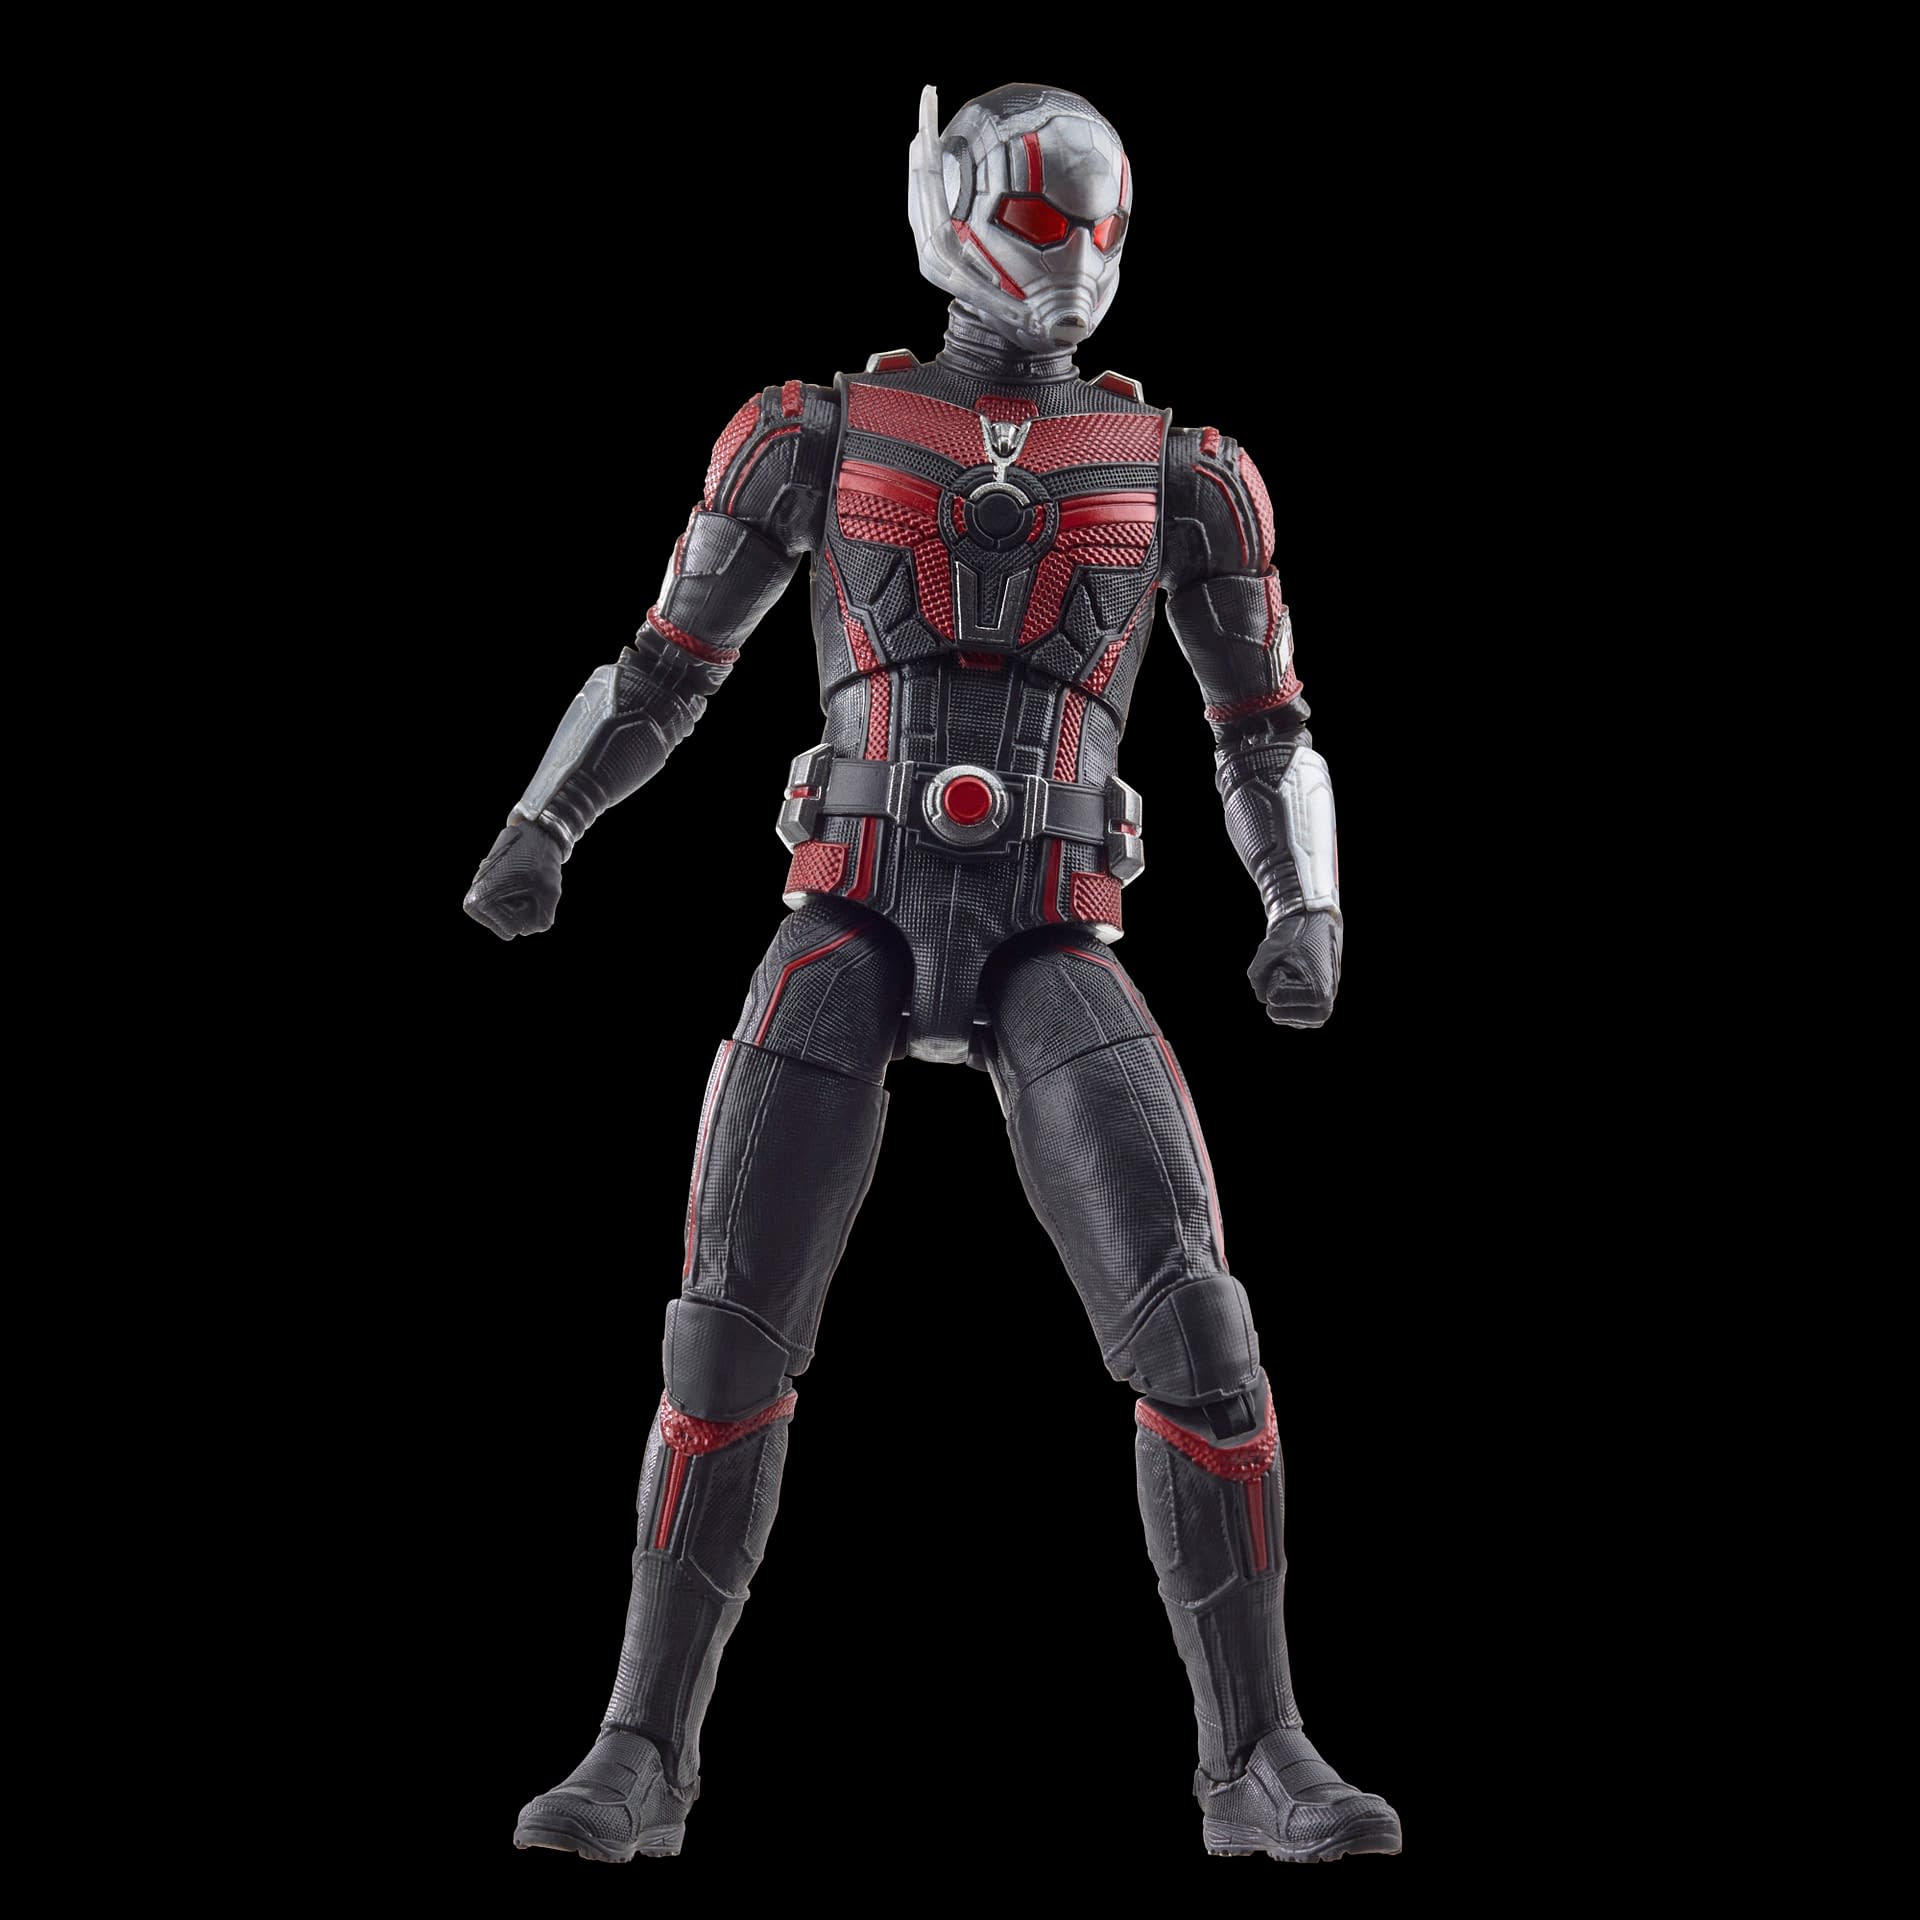 Ant-Man Prepares for Some Quantumania with Hasbro's Marvel Legends 